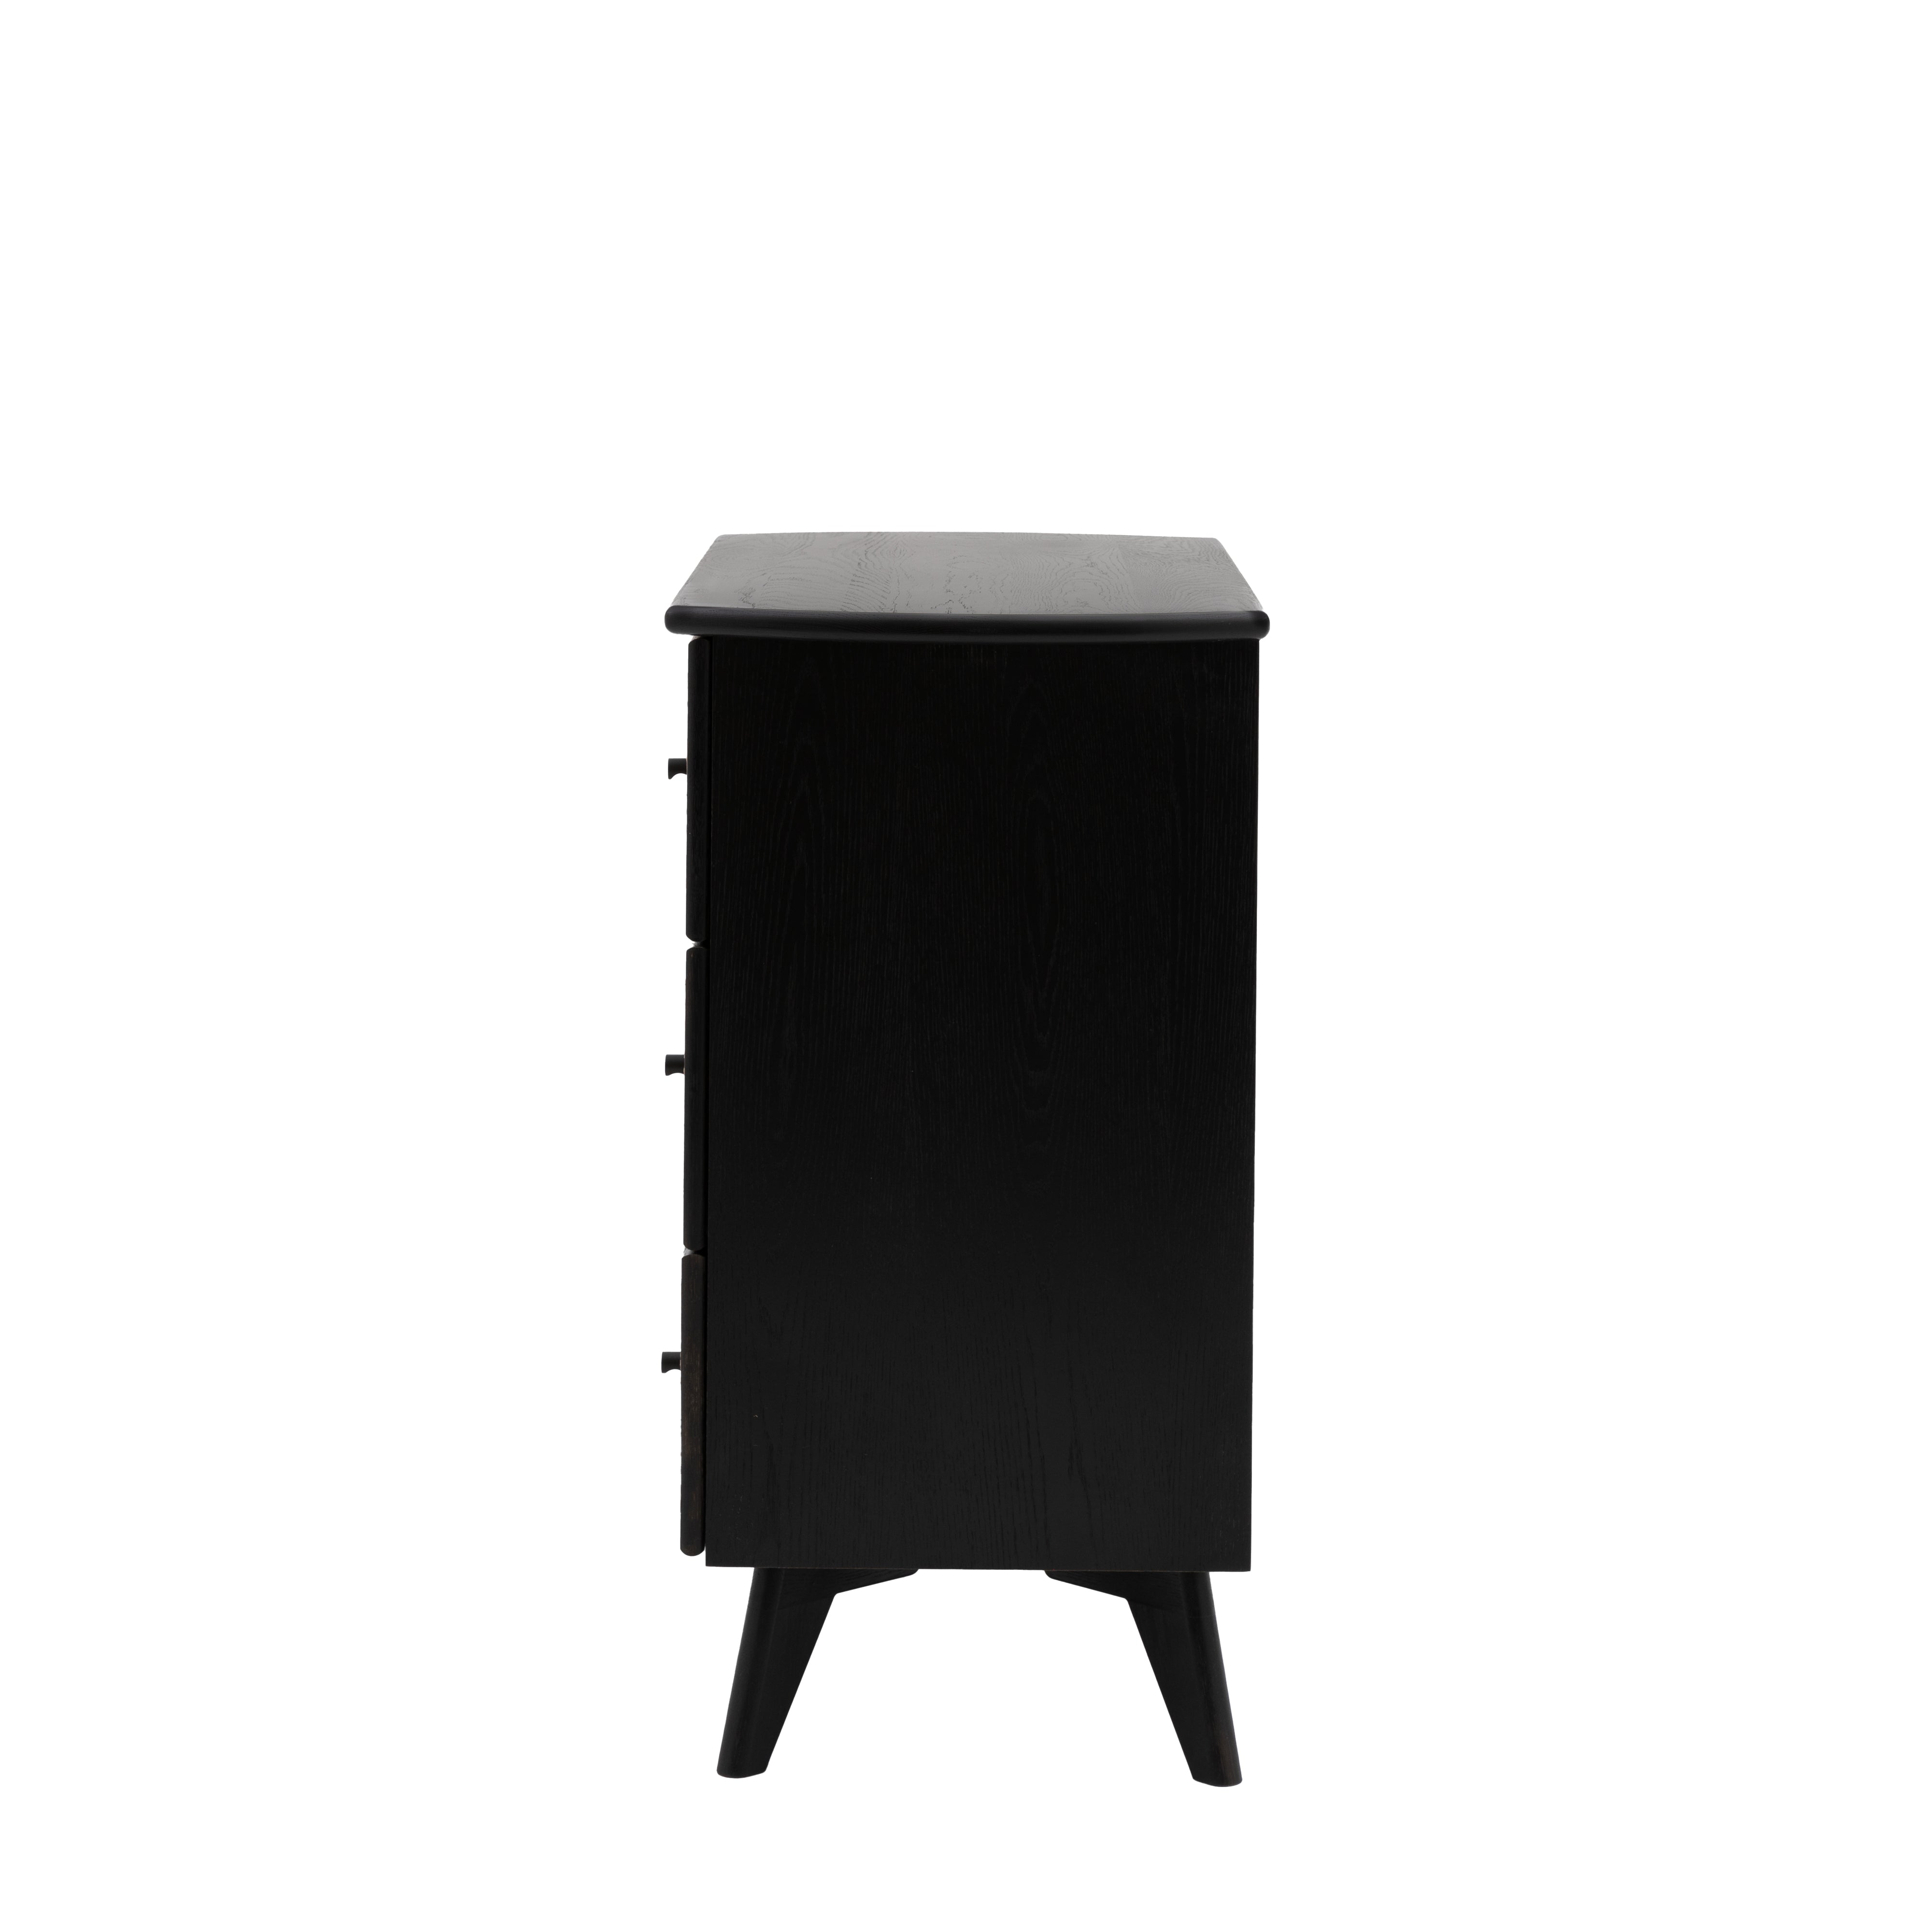 Hoxton Chest of Drawers in black oak with contrasting rattan drawer frontals | MalletandPlane.com